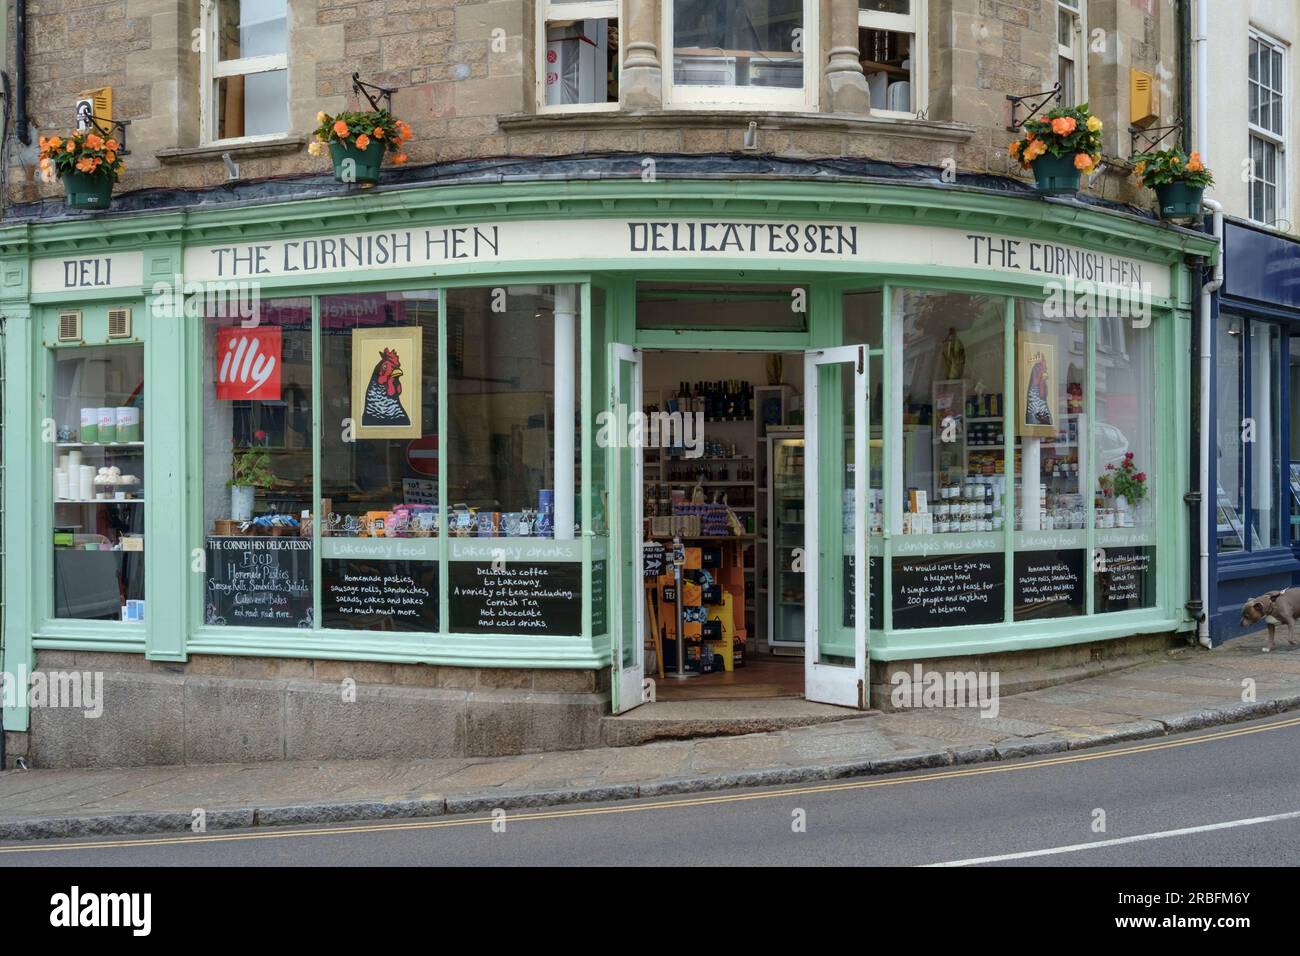 Penzance is a small twon in the south west of Cornwall UK. The Cornish Hen Delicatessen Stock Photo